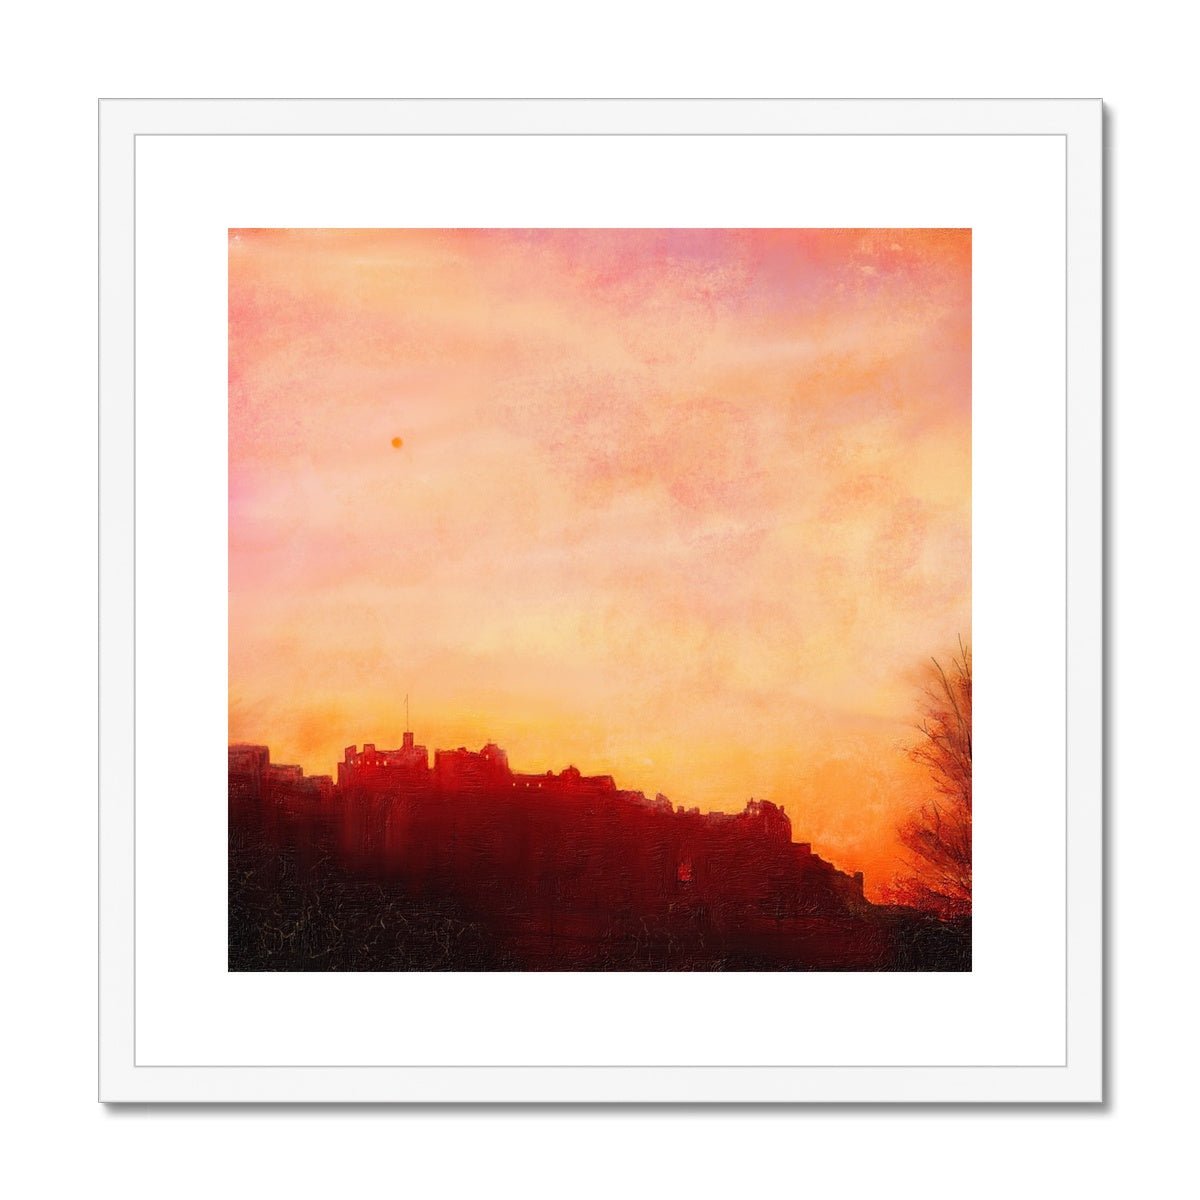 Edinburgh Castle Sunset Painting | Framed & Mounted Prints From Scotland-Framed & Mounted Prints-Historic & Iconic Scotland Art Gallery-20"x20"-White Frame-Paintings, Prints, Homeware, Art Gifts From Scotland By Scottish Artist Kevin Hunter